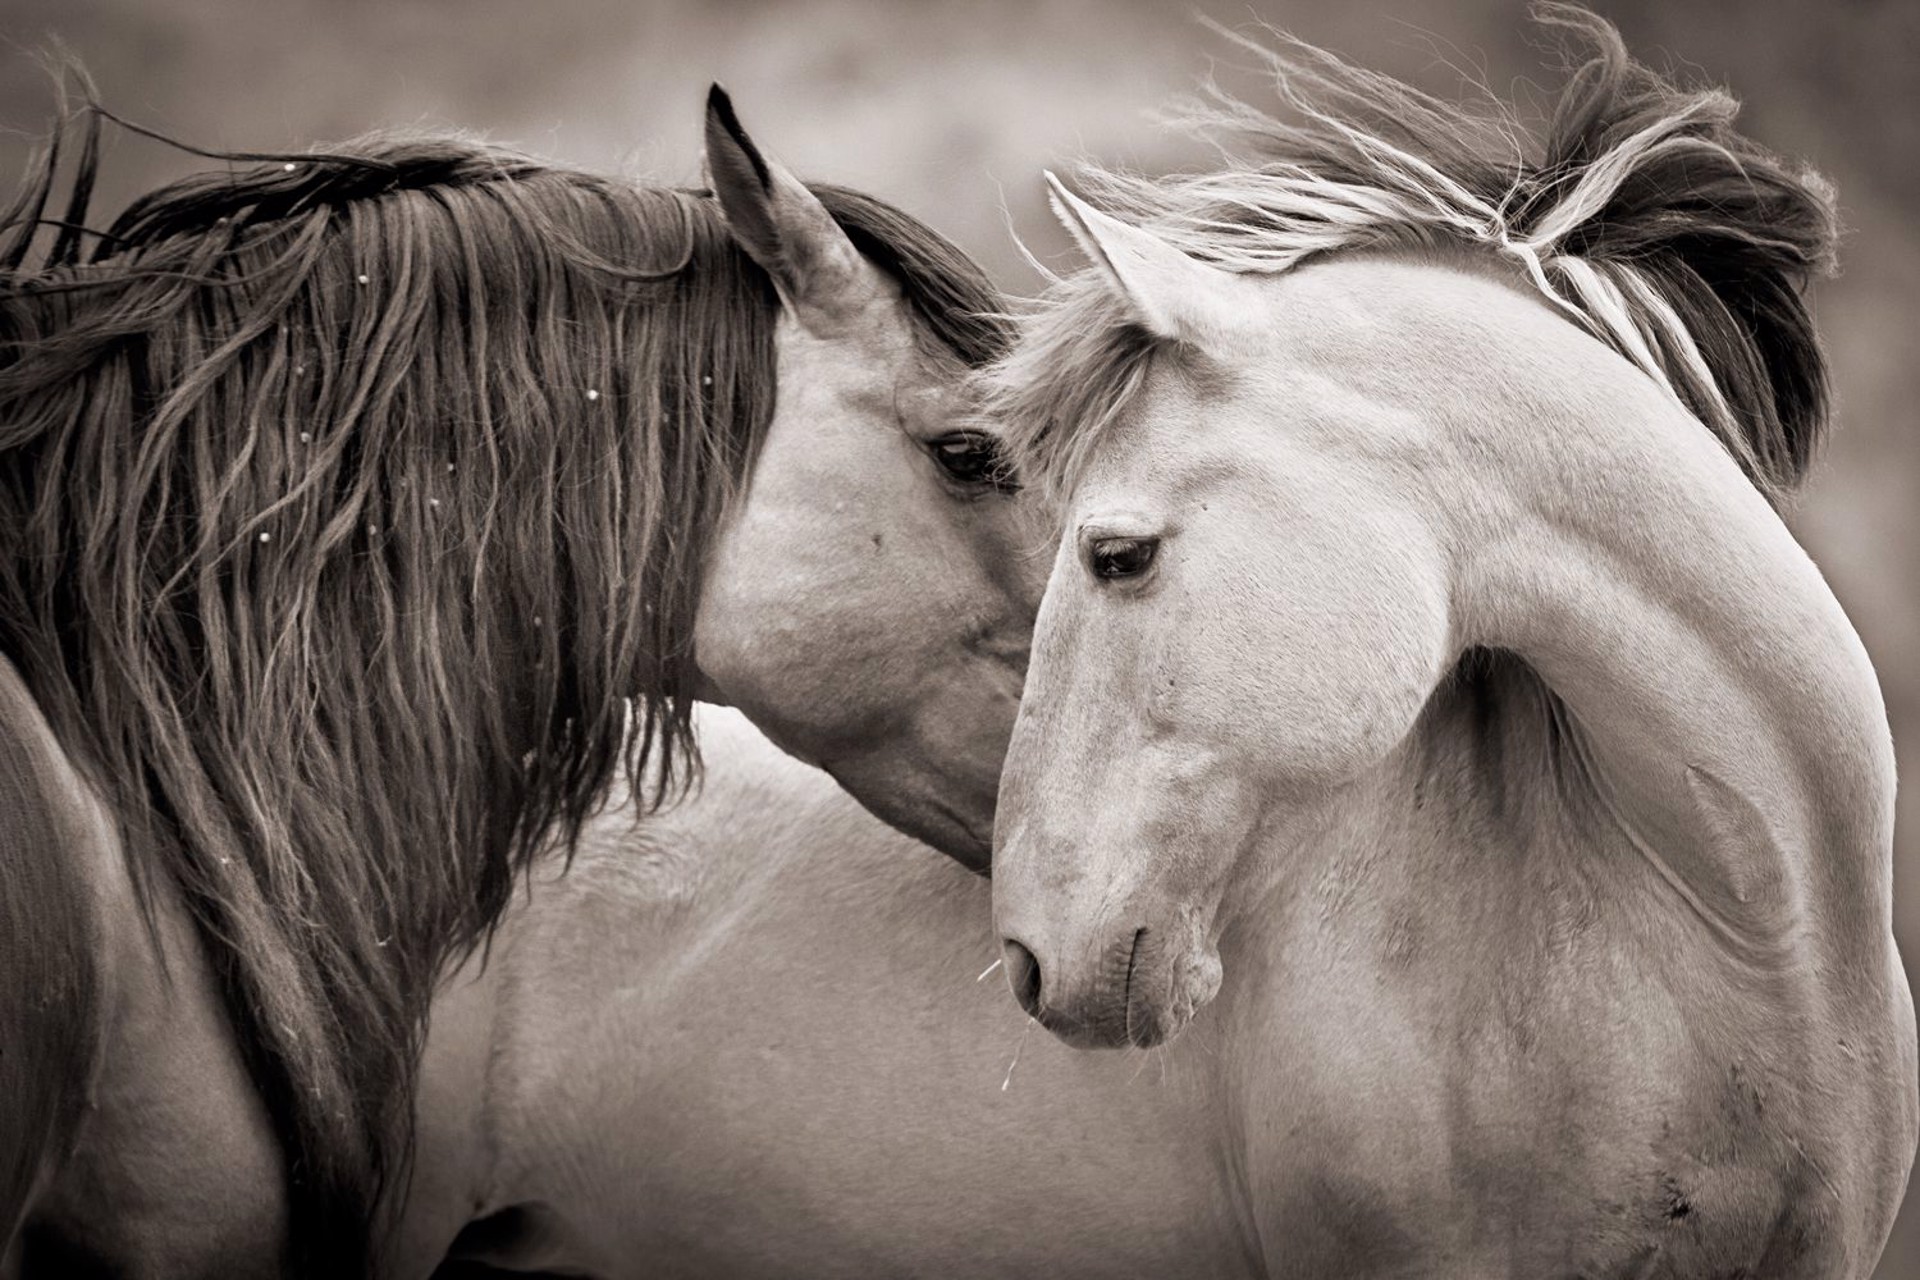 Black And White Photograph Featuring Two Wild Horses With Heads Touching